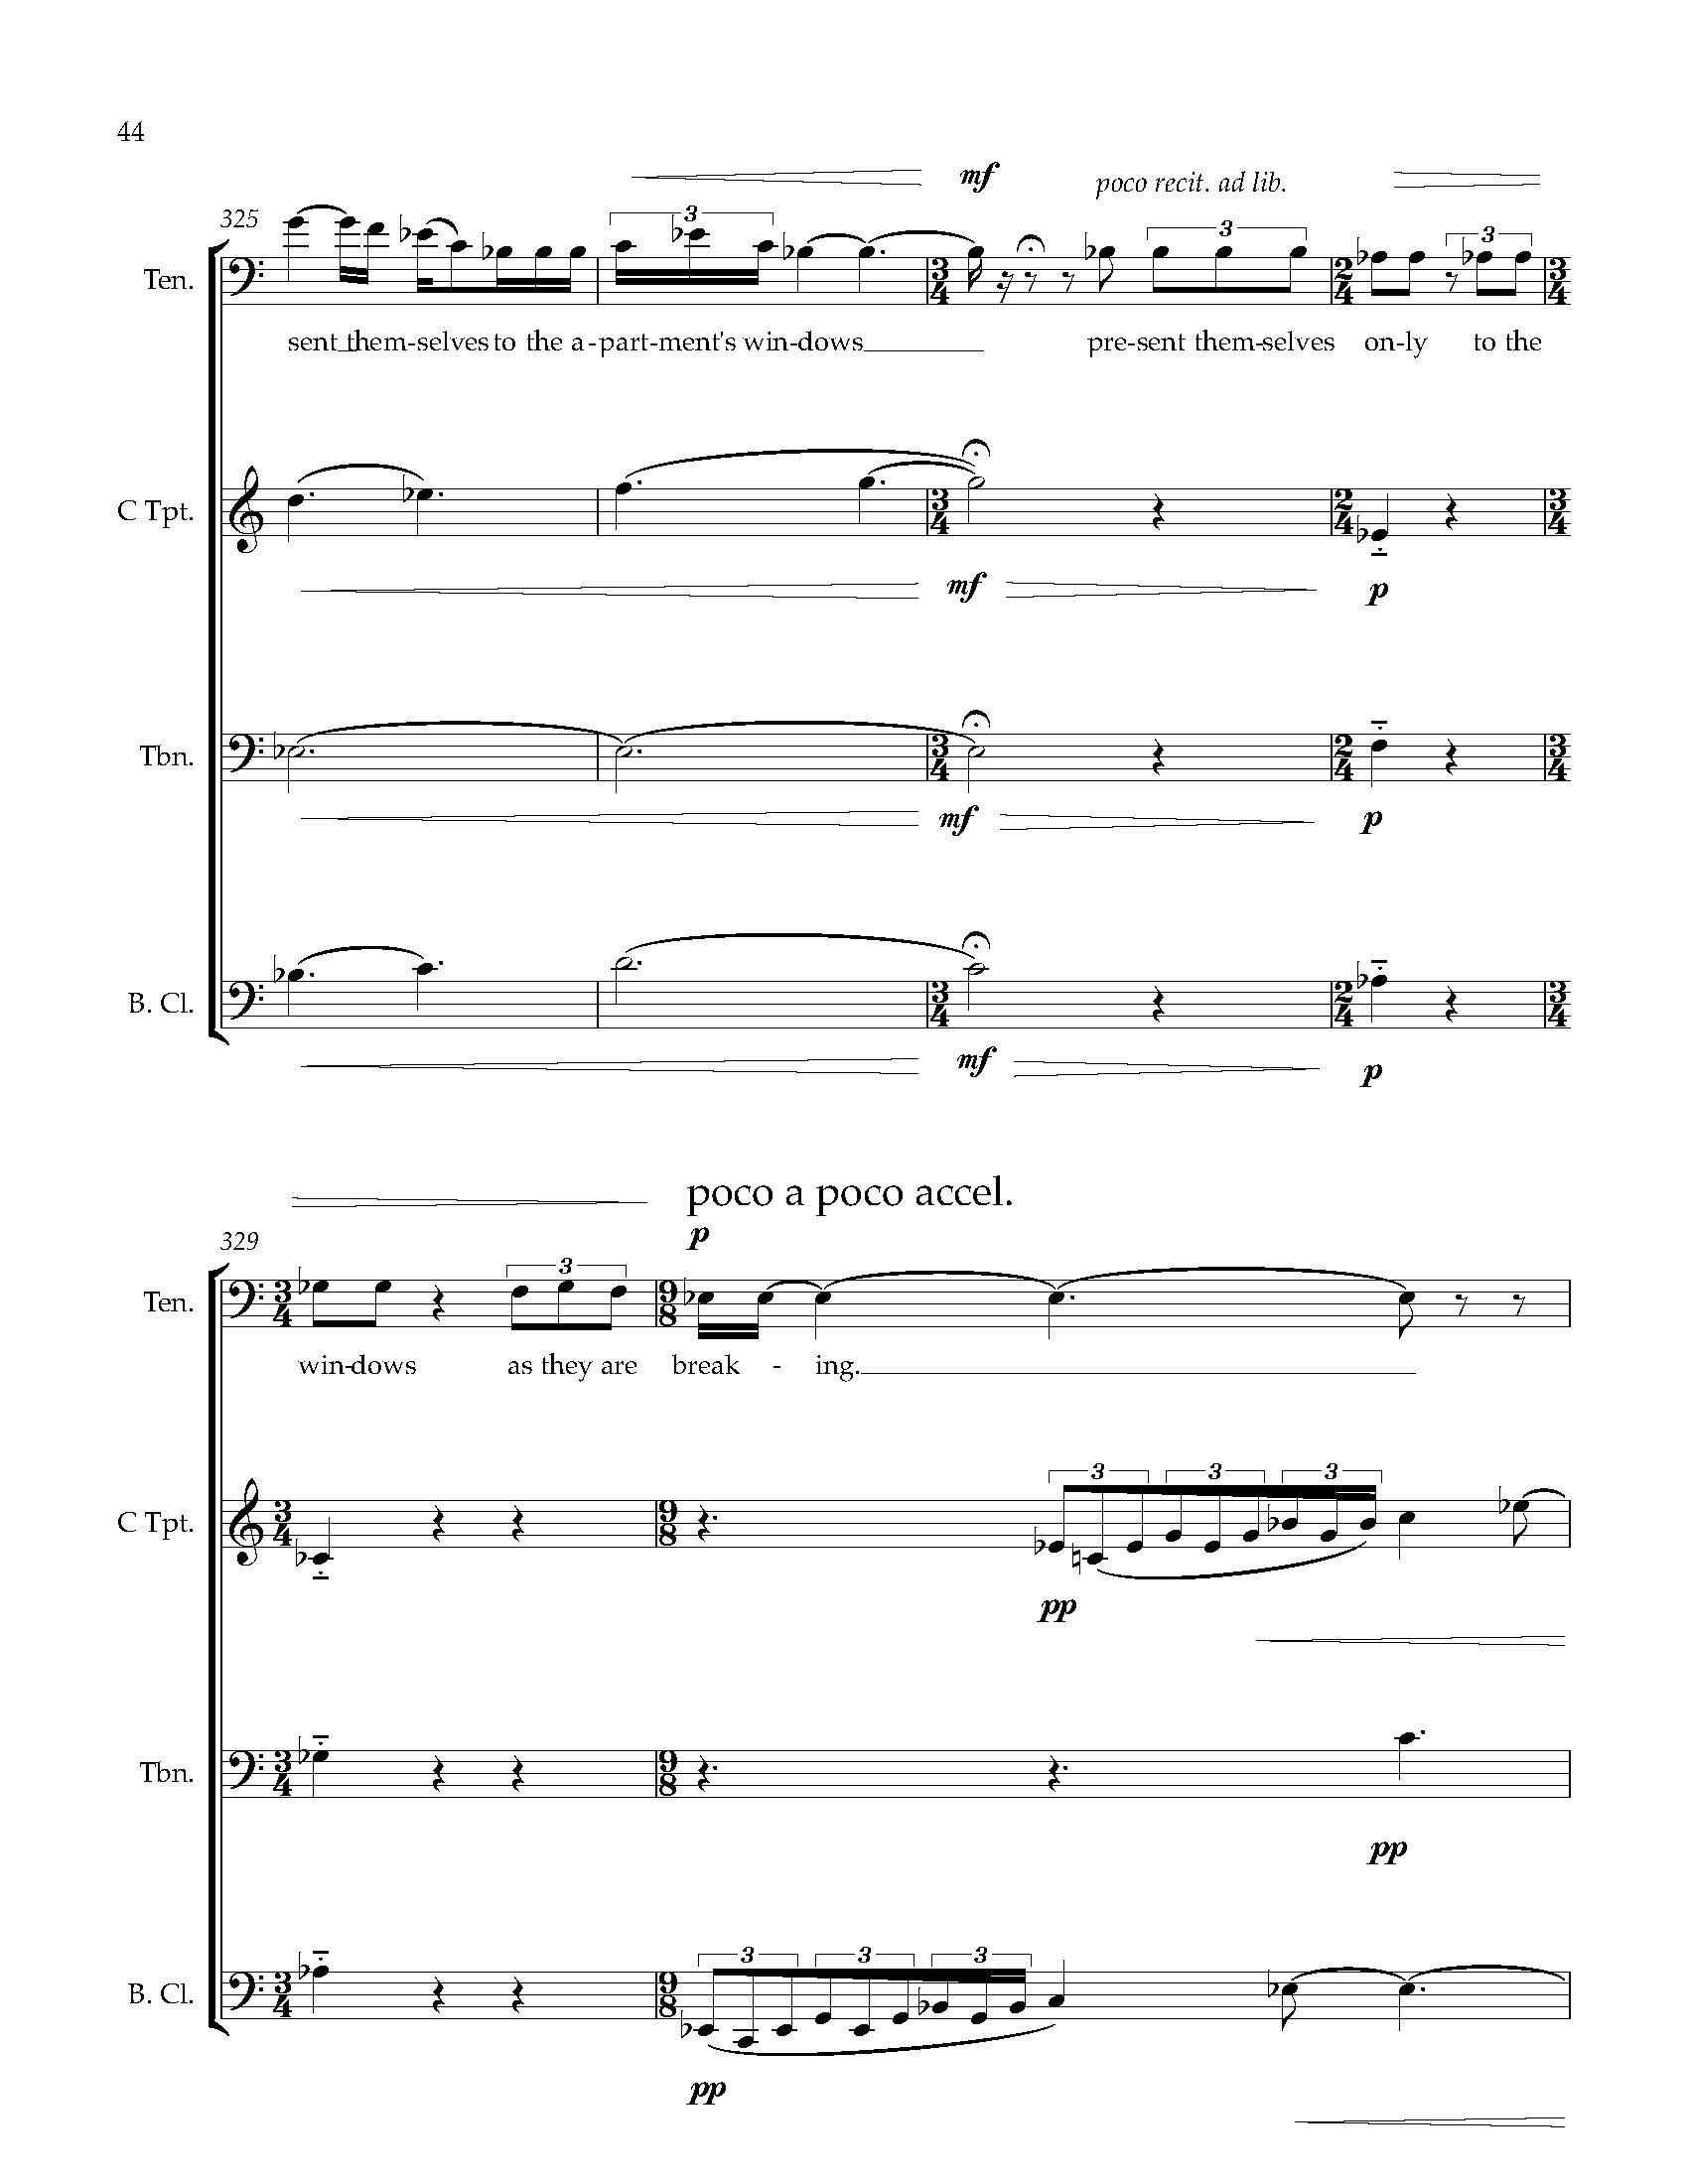 Many Worlds [1] - Complete Score_Page_53.jpg